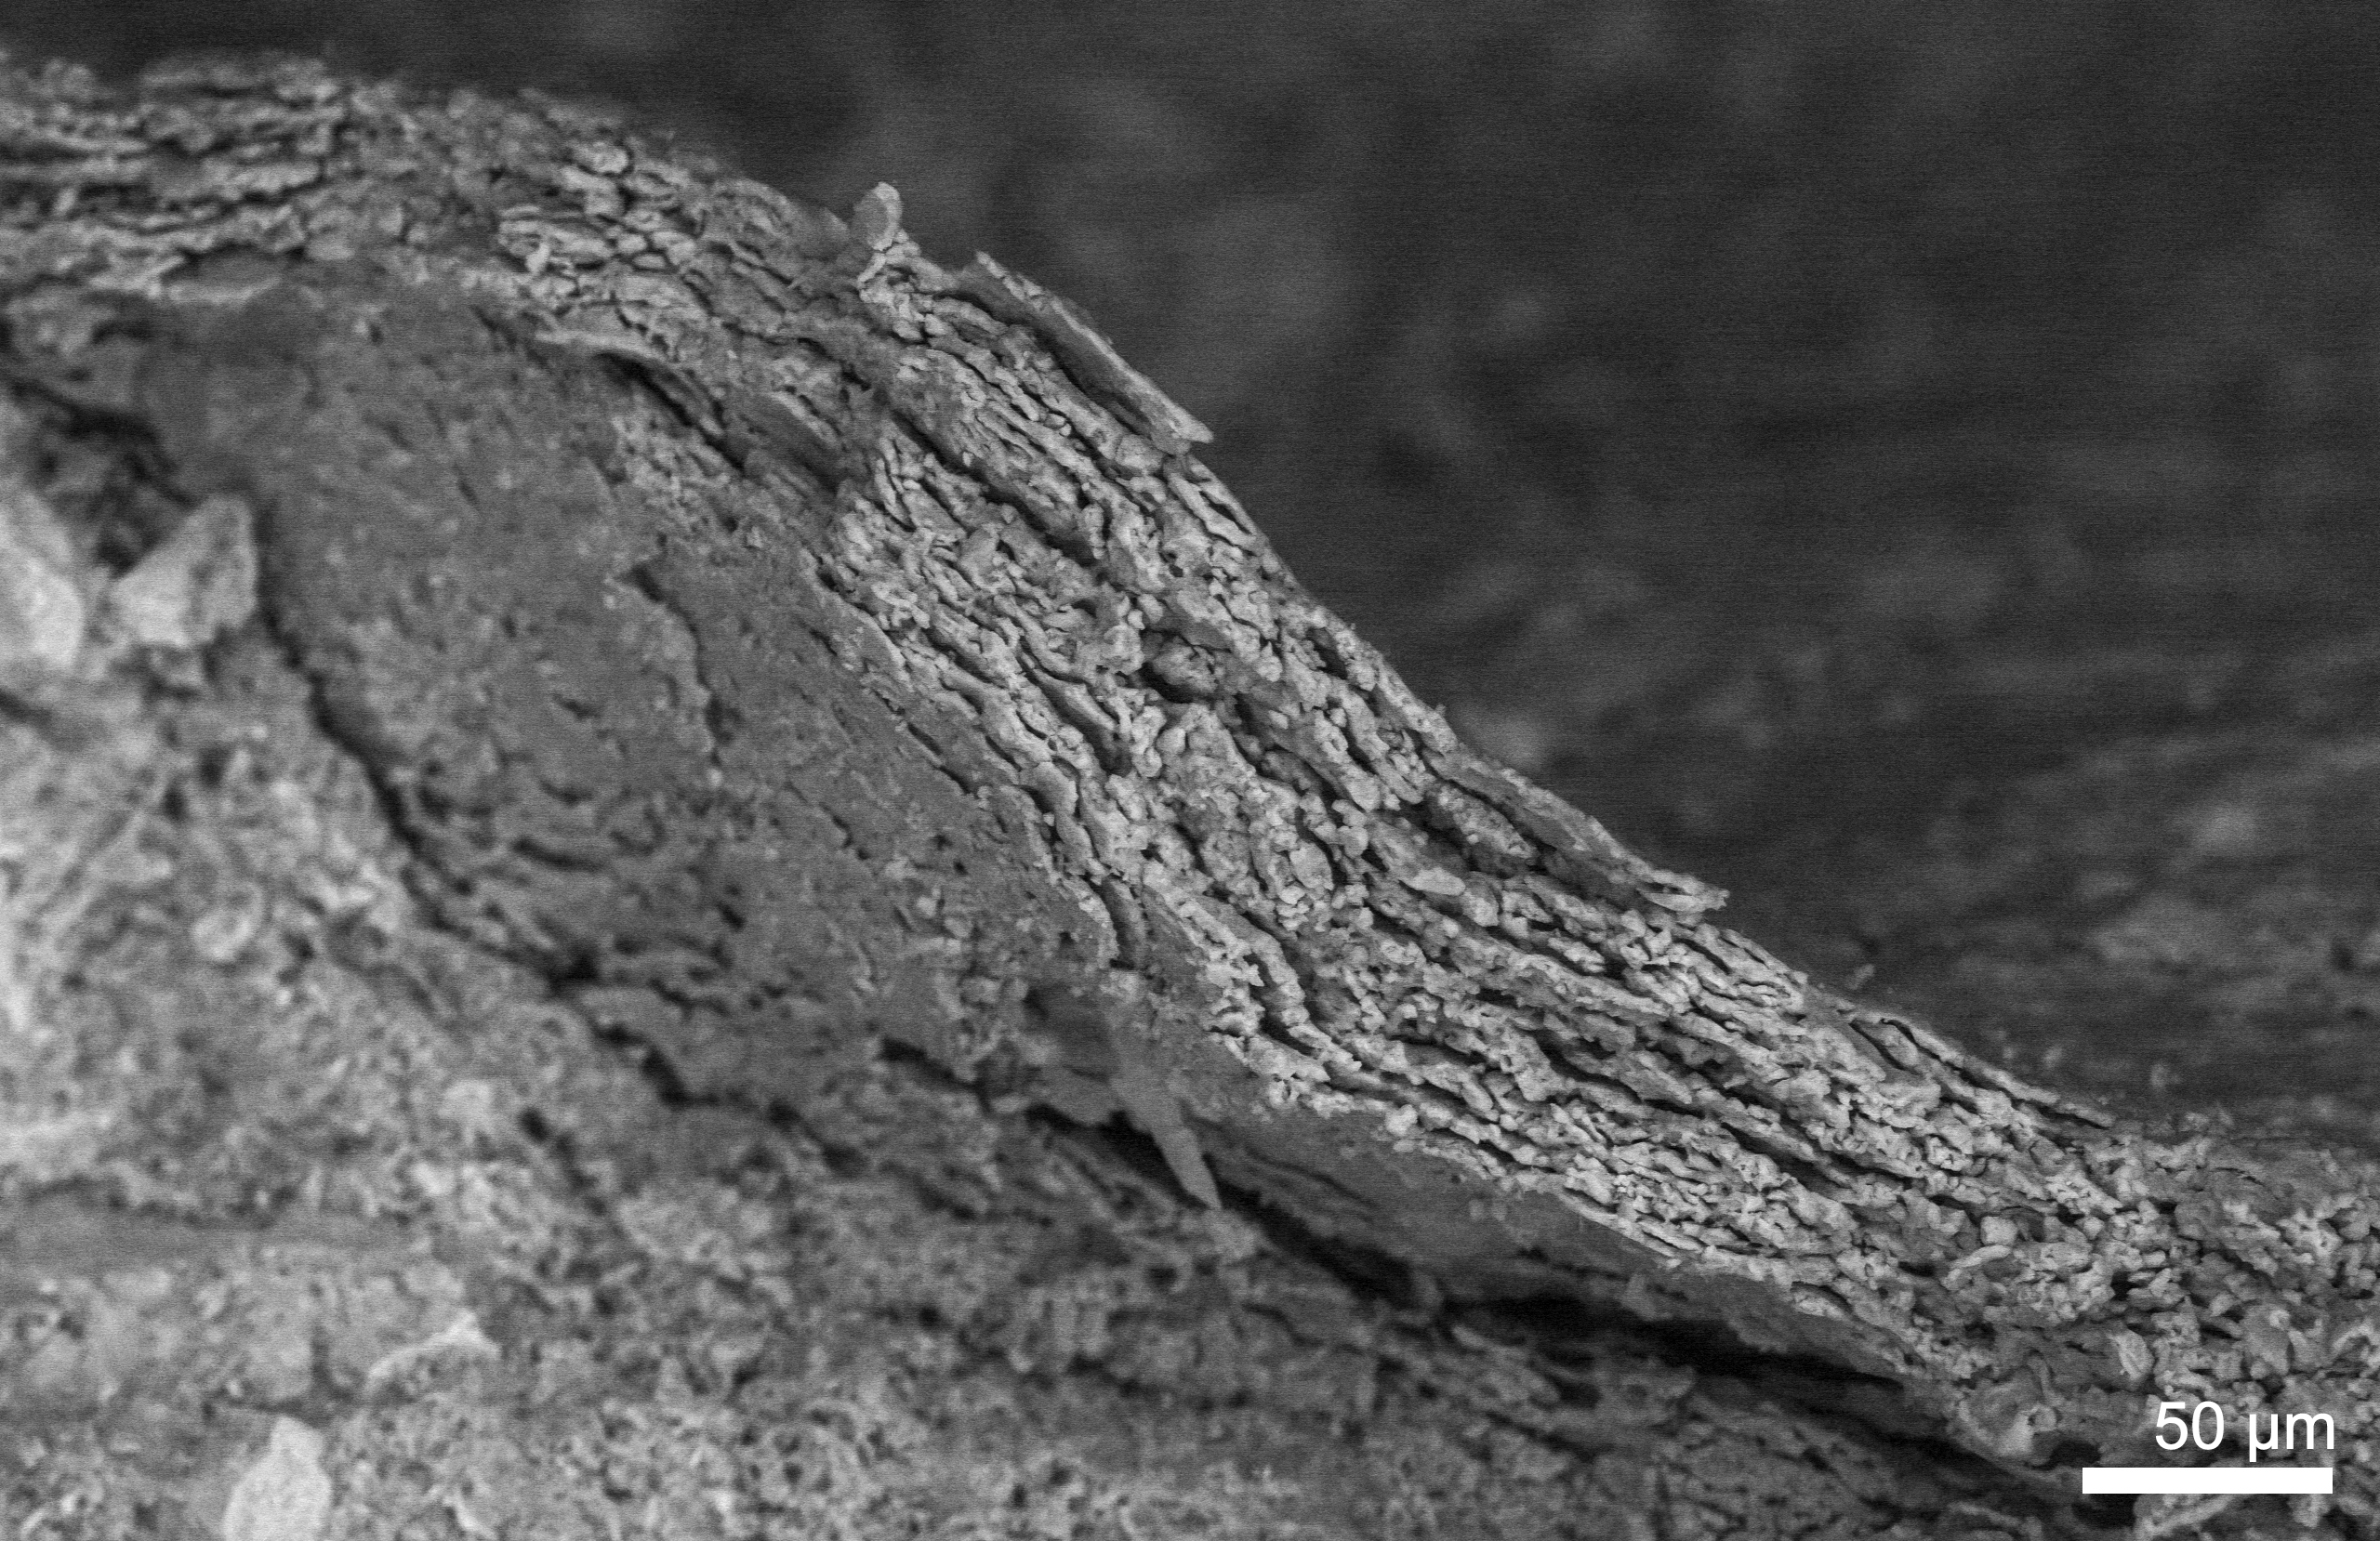 The fossil skin under an electron microscope, showing mineralised cell layers